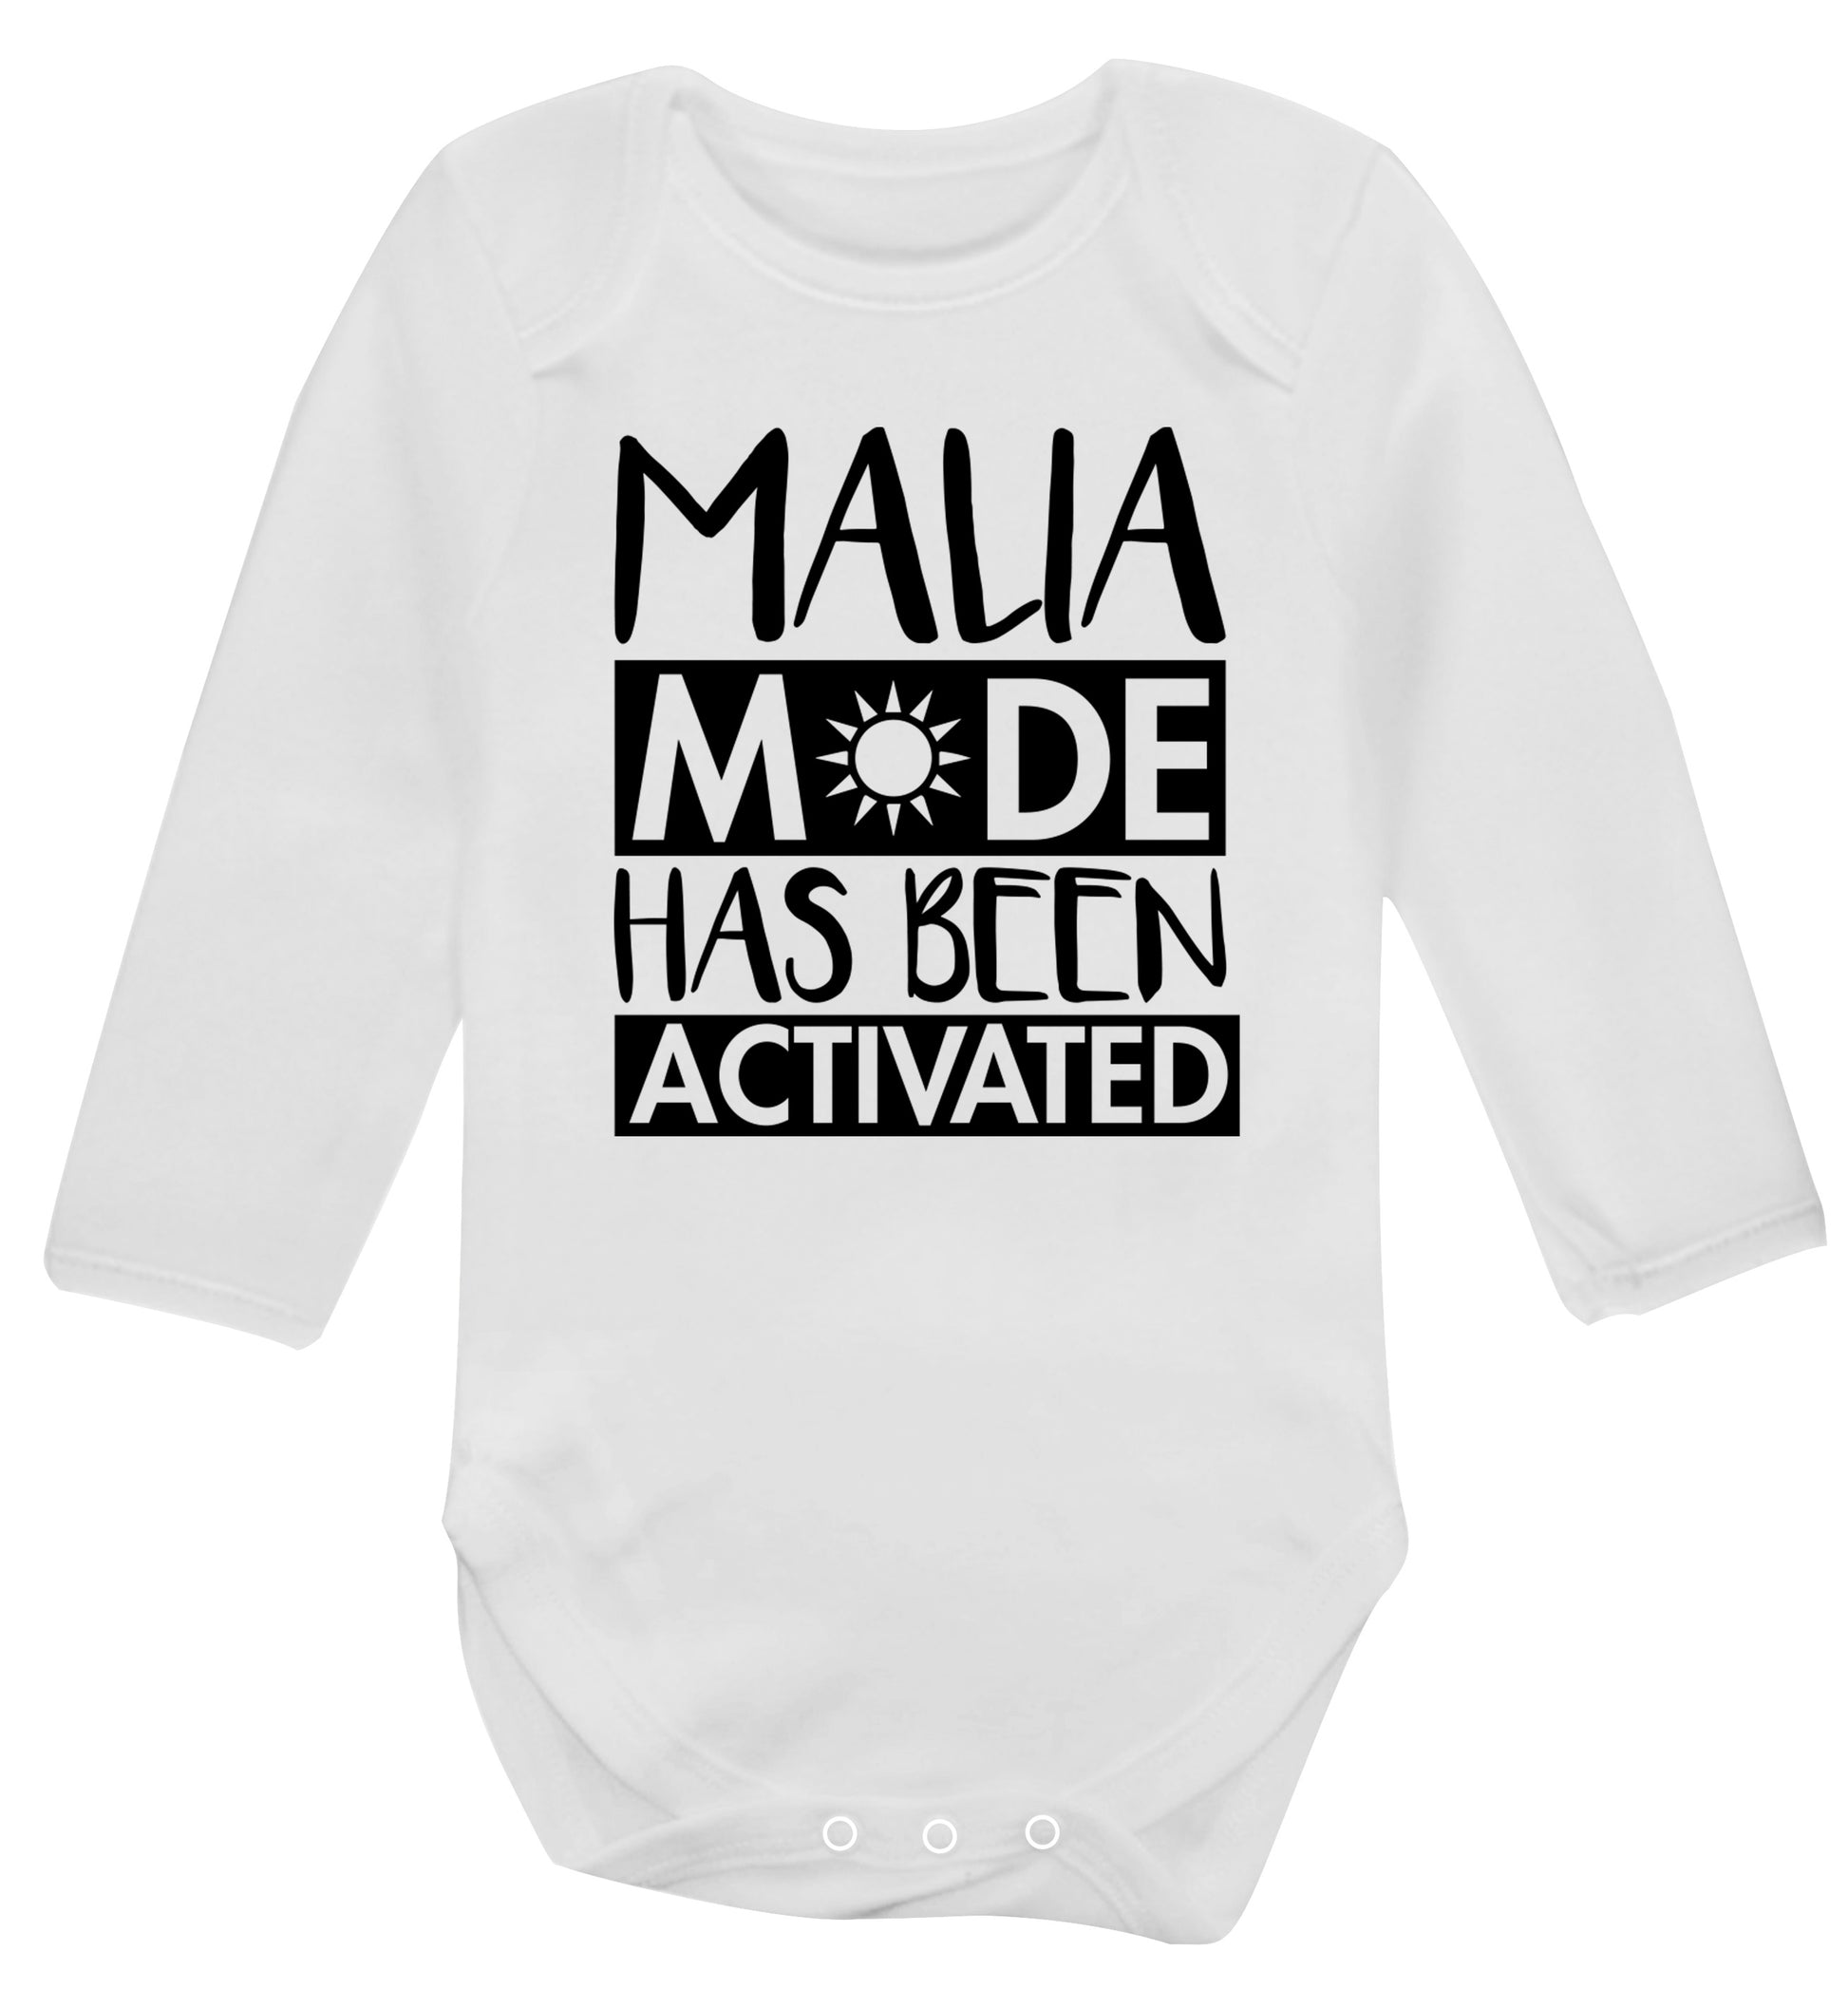 Malia mode has been activated Baby Vest long sleeved white 6-12 months